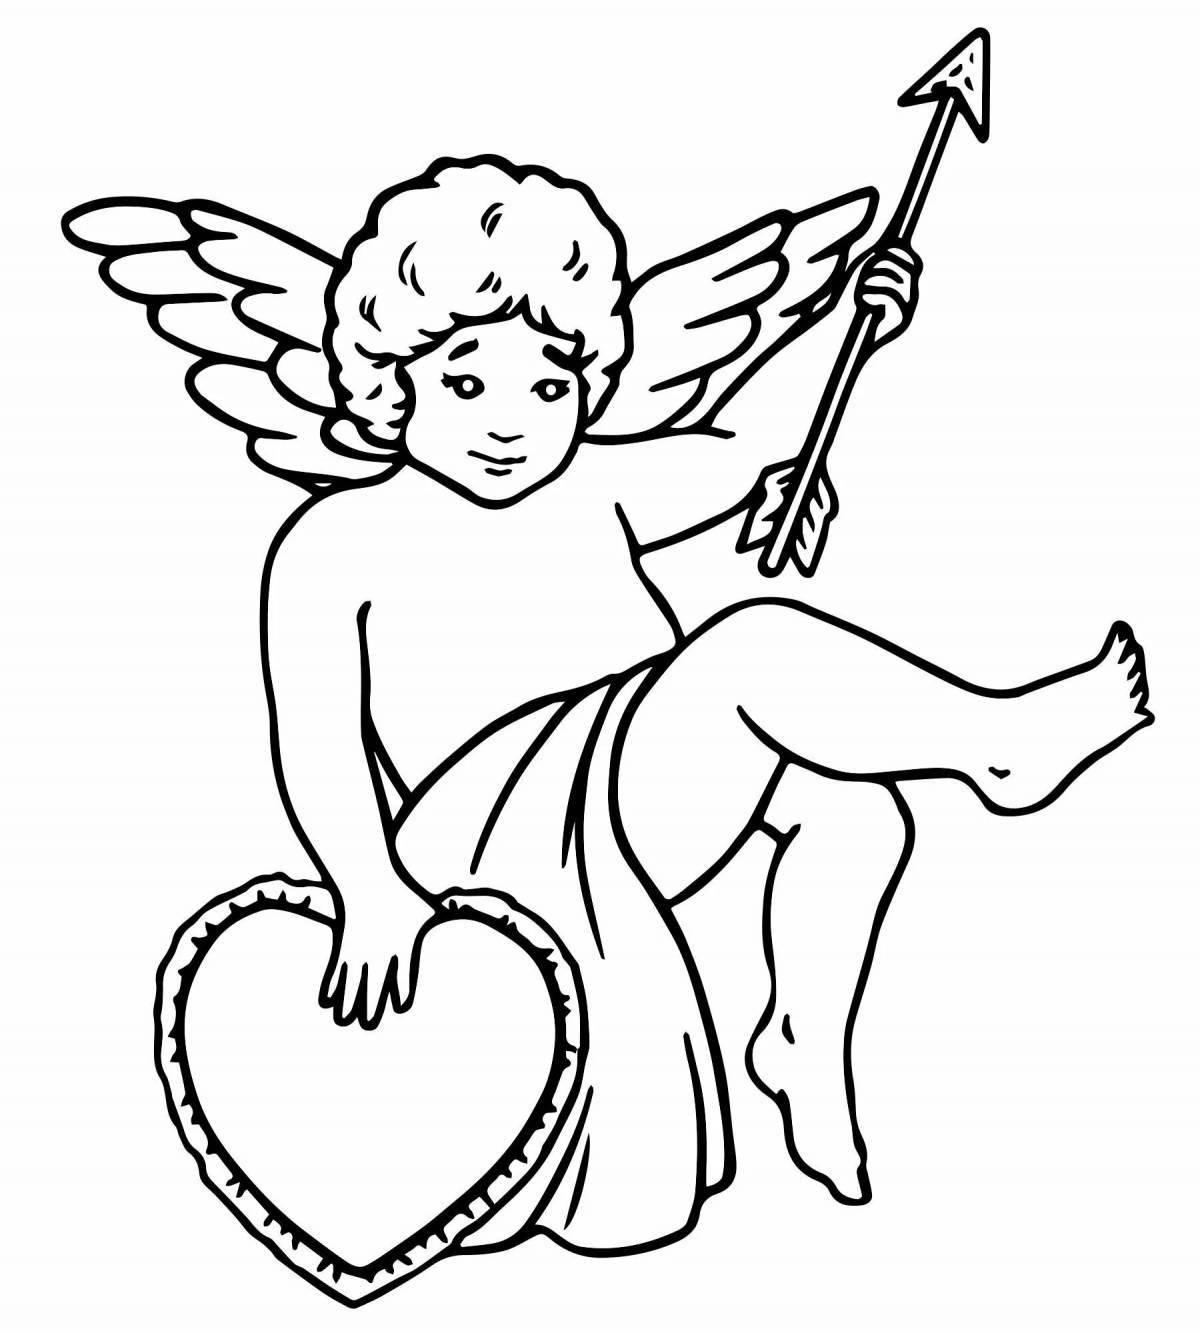 Charming cupid coloring book